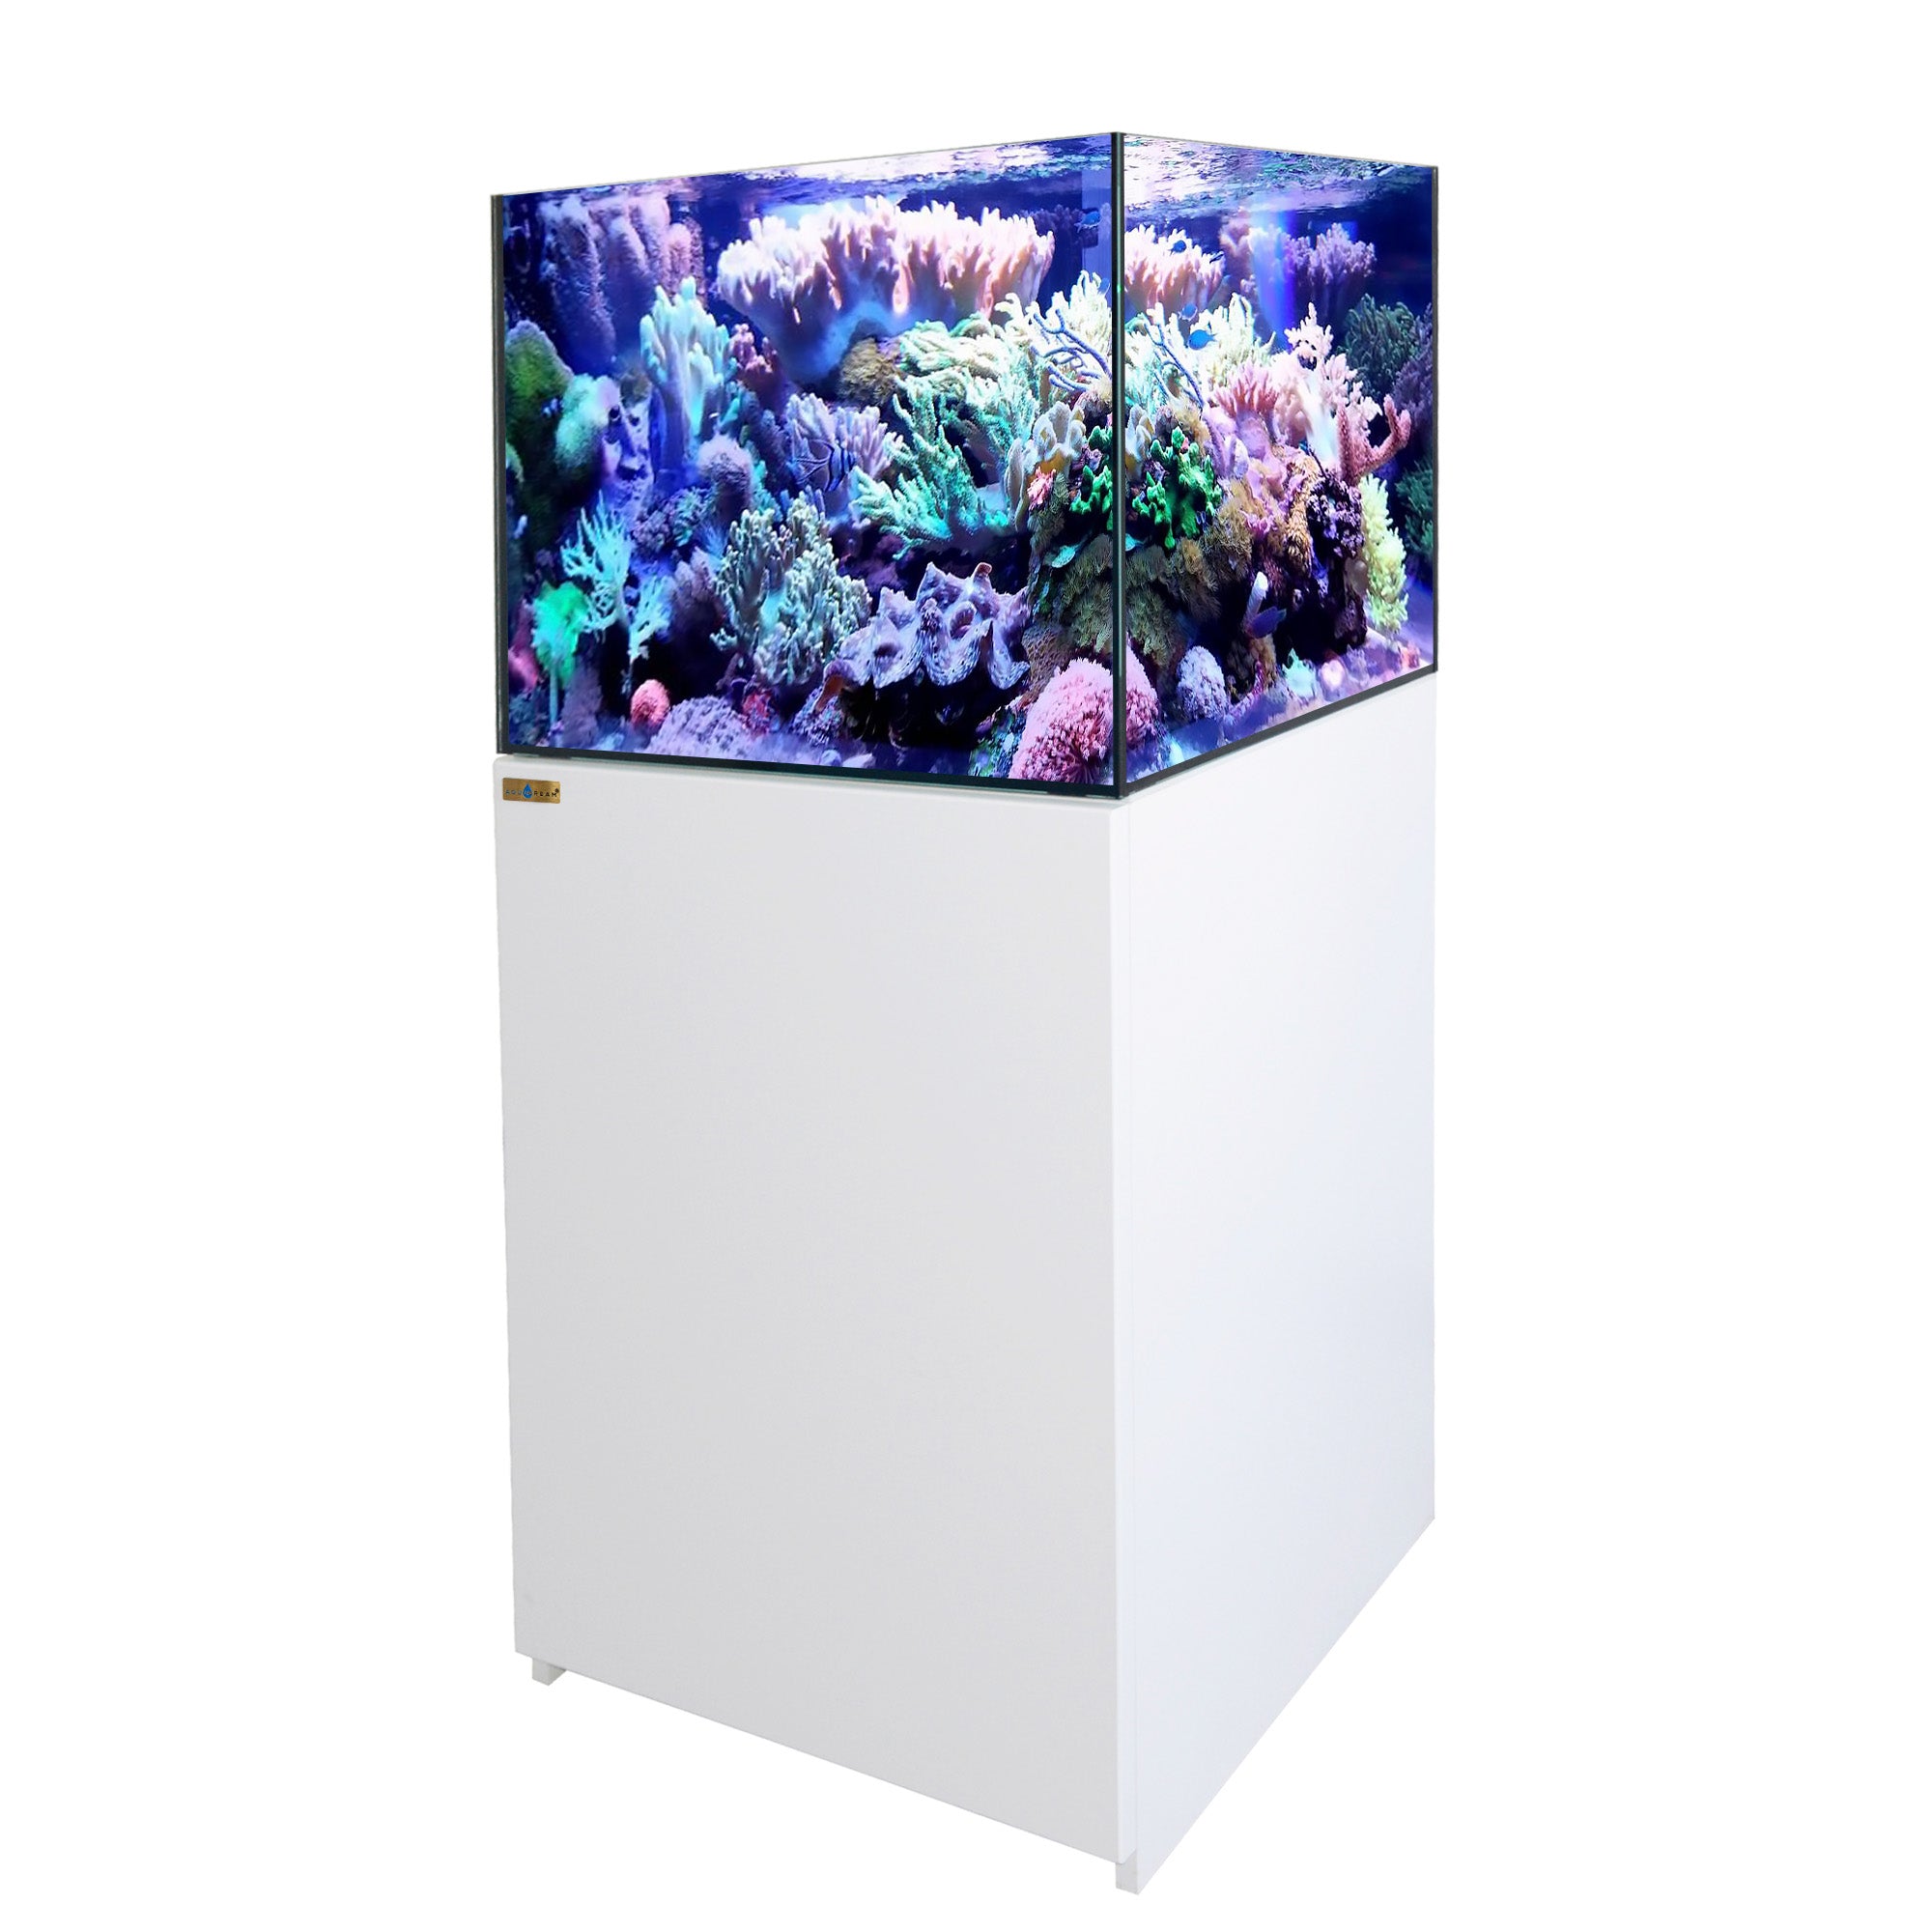 Ultimate Marine Aquariums: Saltwater Dream Systems and How They Are Created